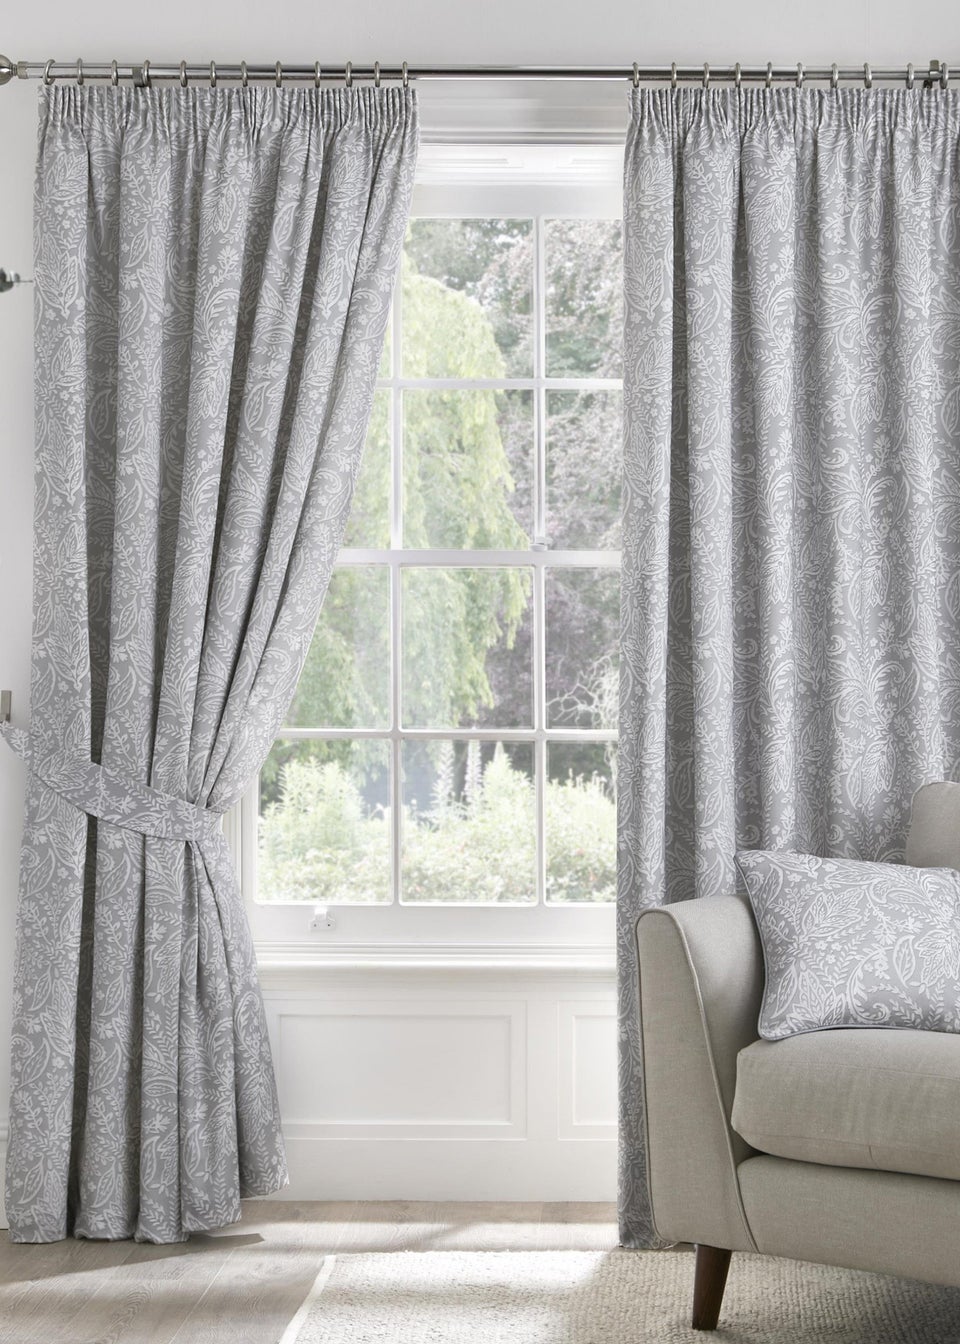 Dreams & Drapes Aveline Grey Pencil Pleat Curtains With Tie-Backs